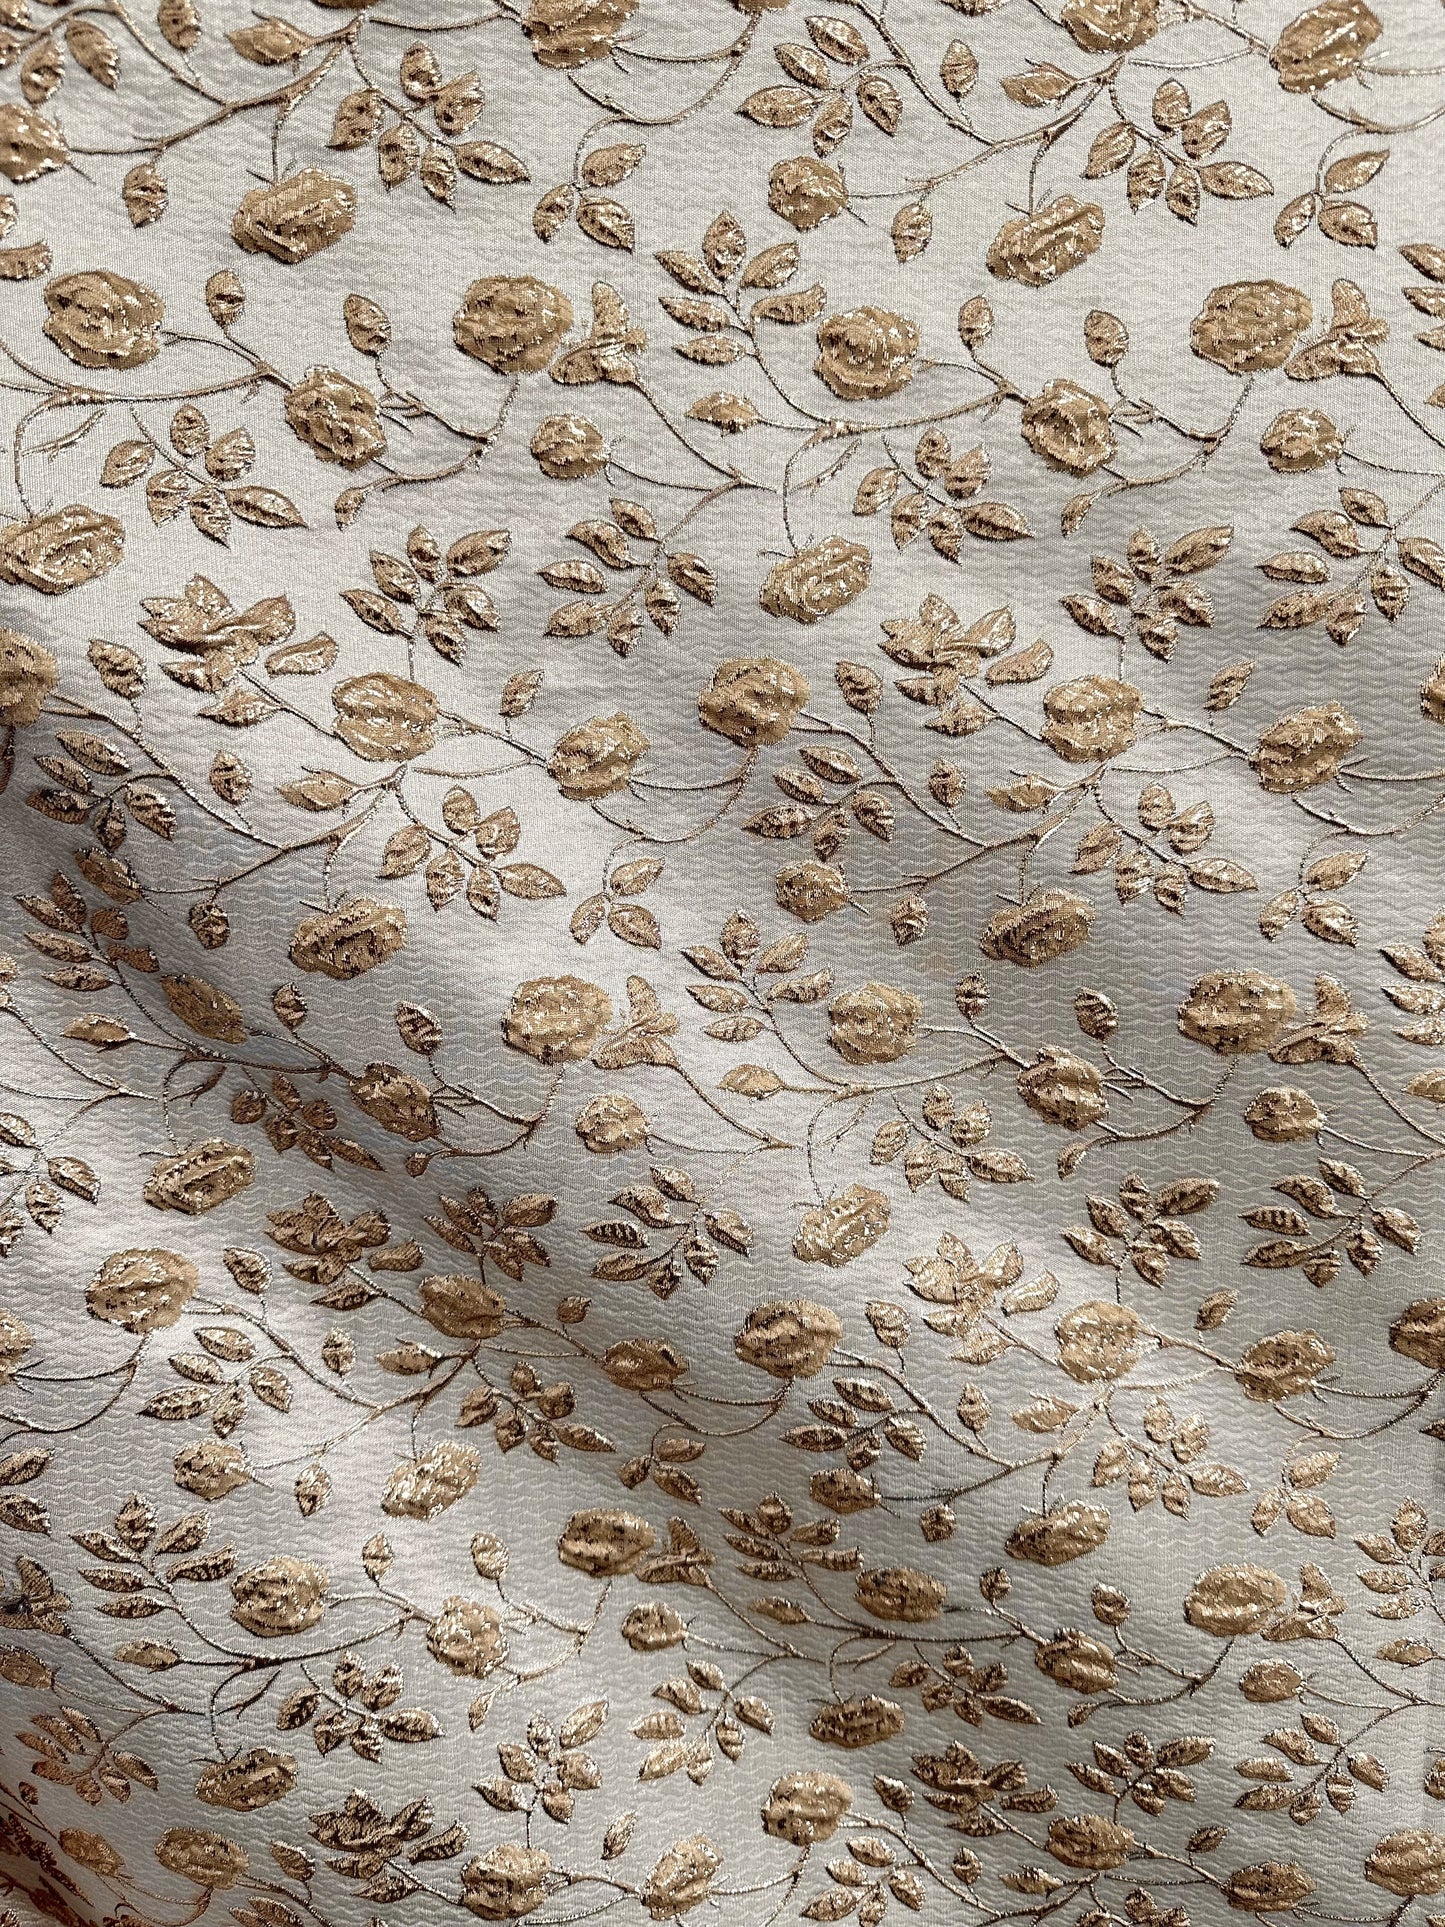 DARK CHAMPAGNE GOLD Floral Brocade Fabric (60 in.) Sold By The Yard